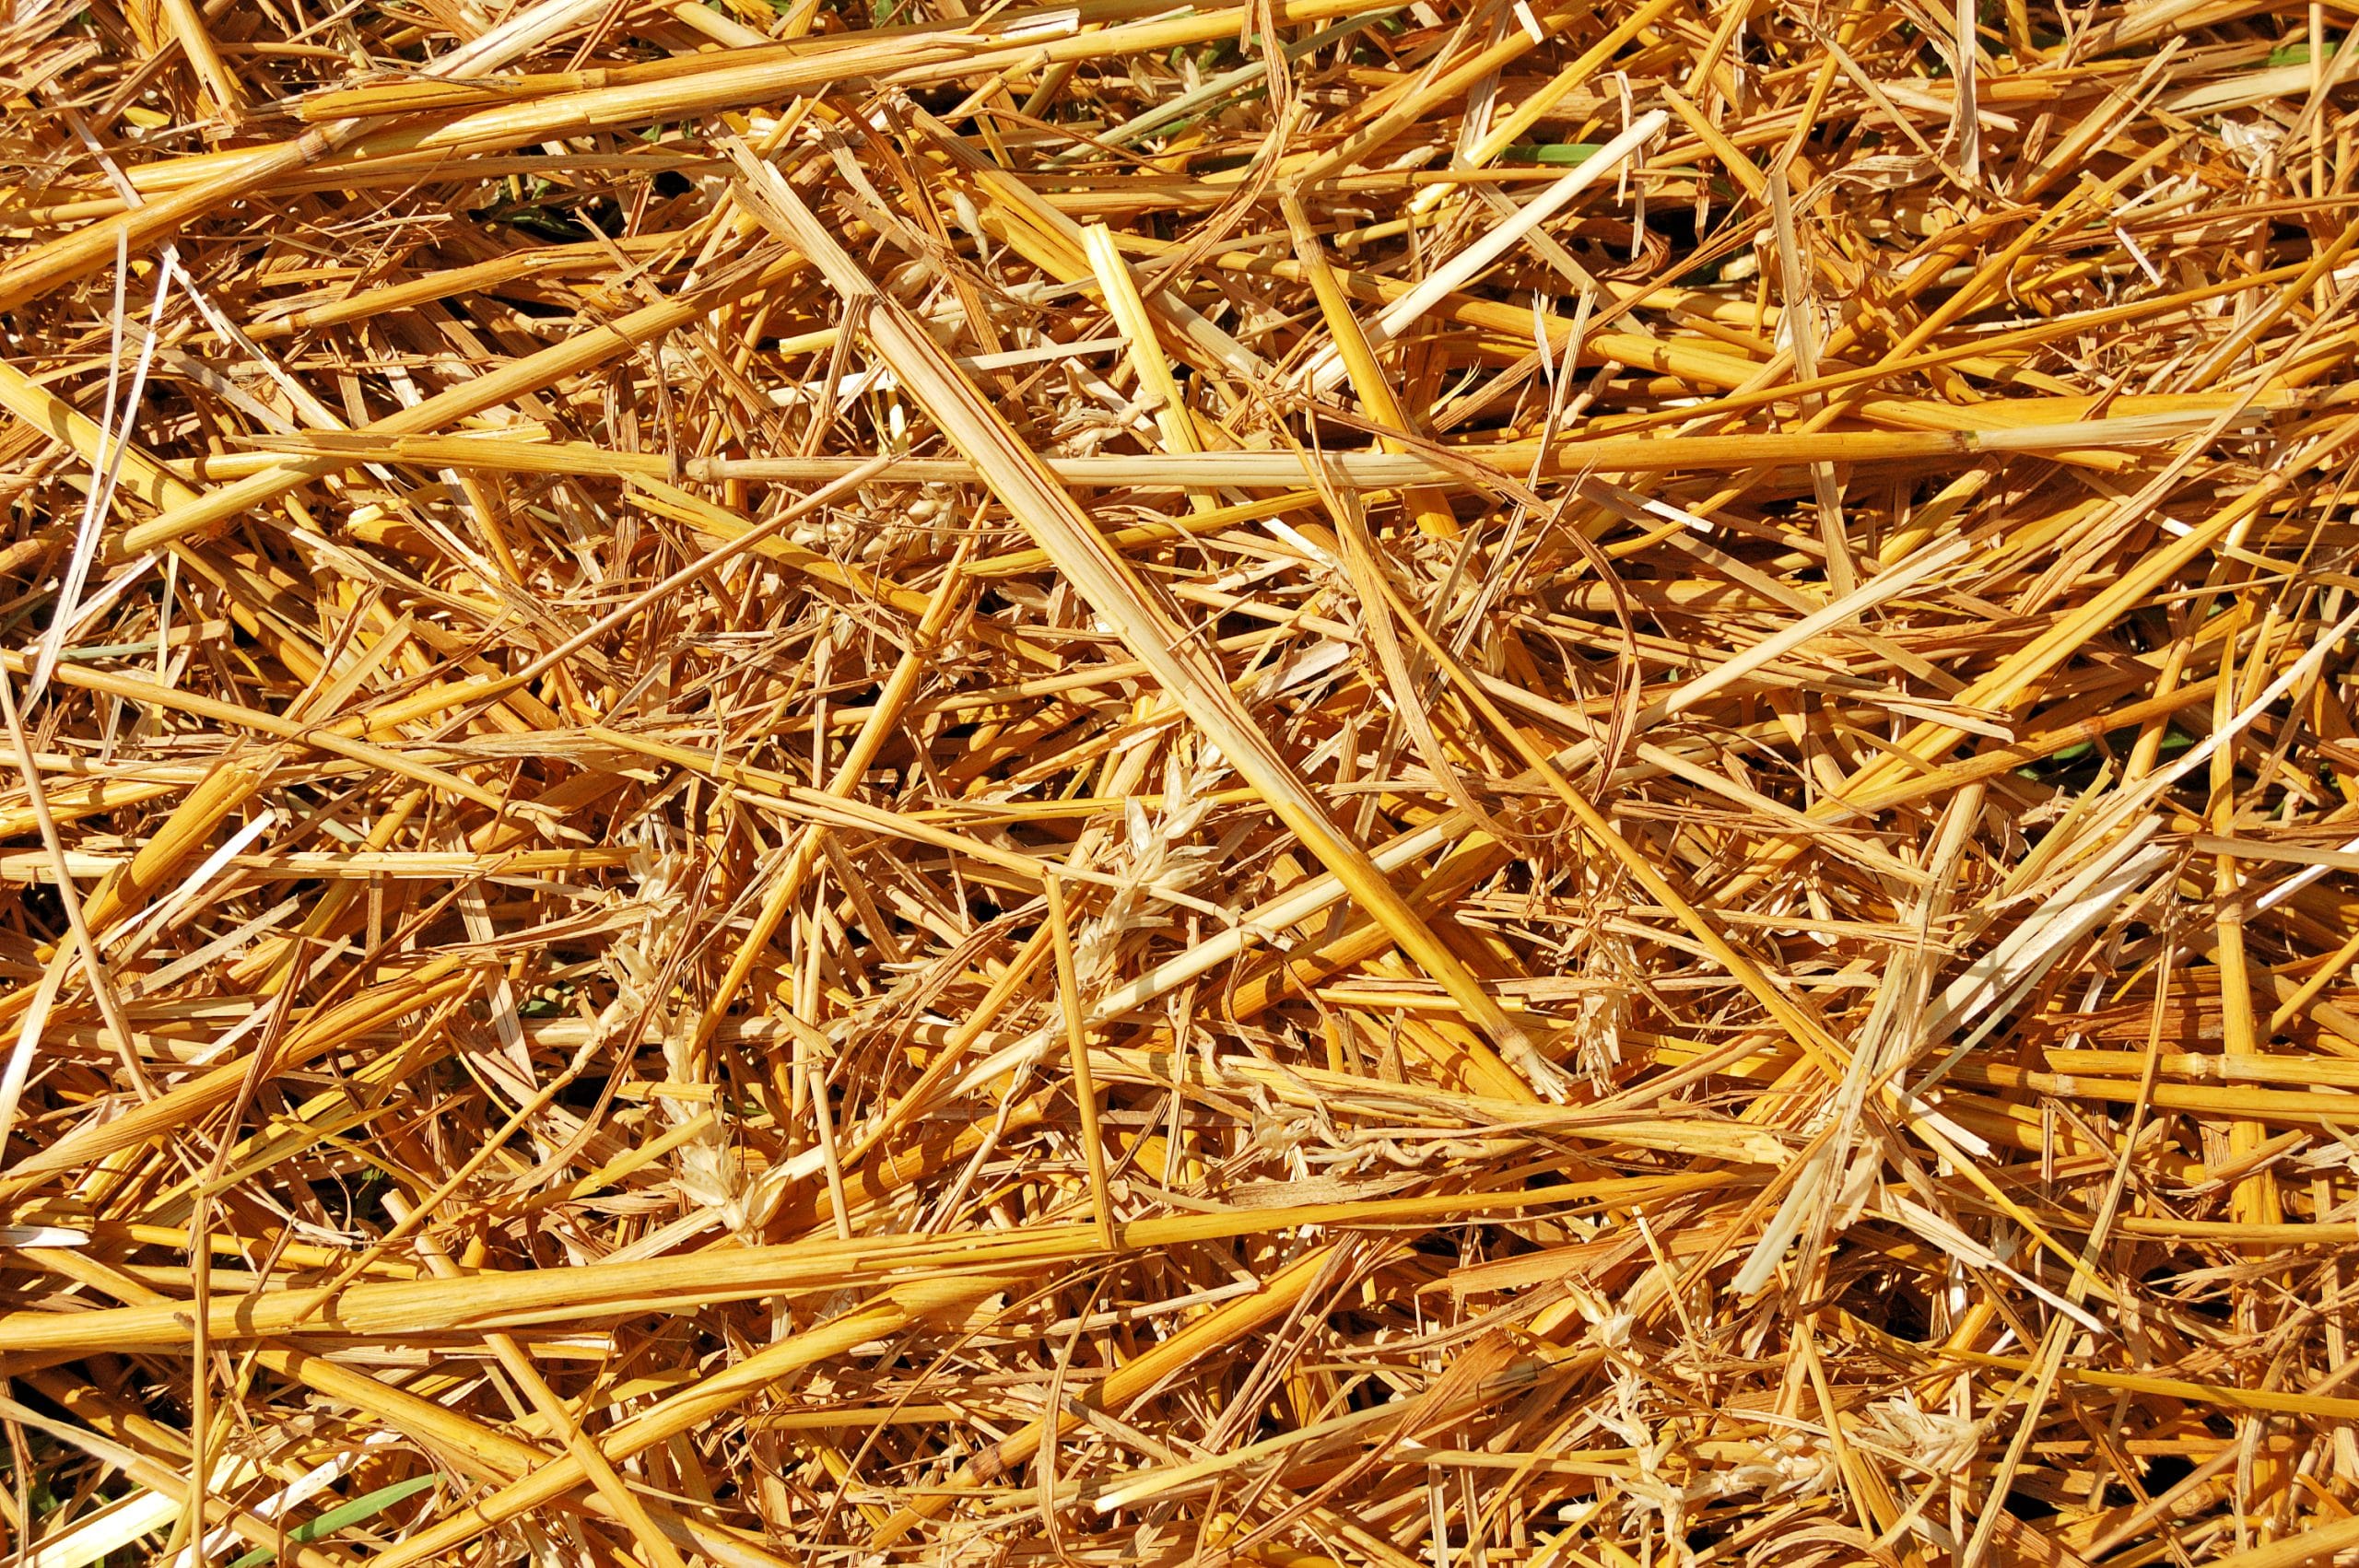 a bed of straw mulch